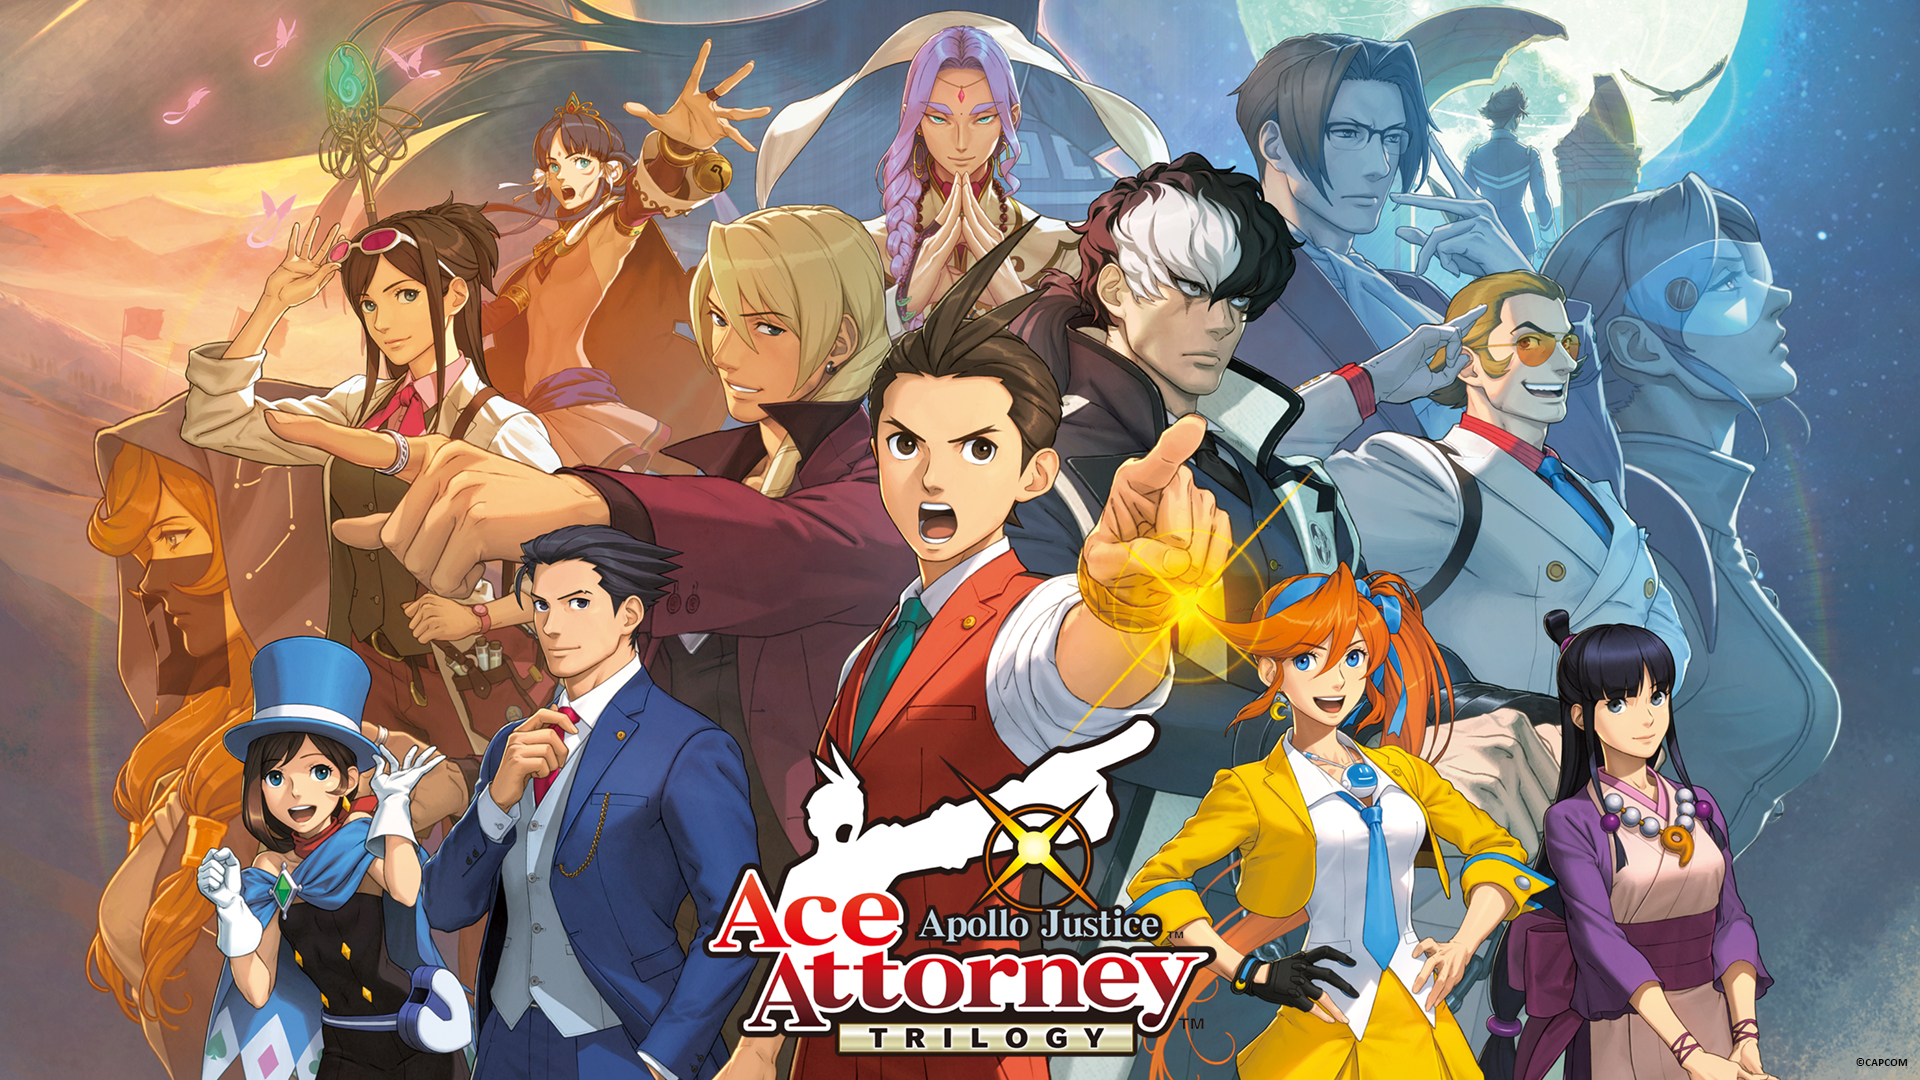 Jogos: Apollo Justice: Ace Attorney Trilogy &#124; Review